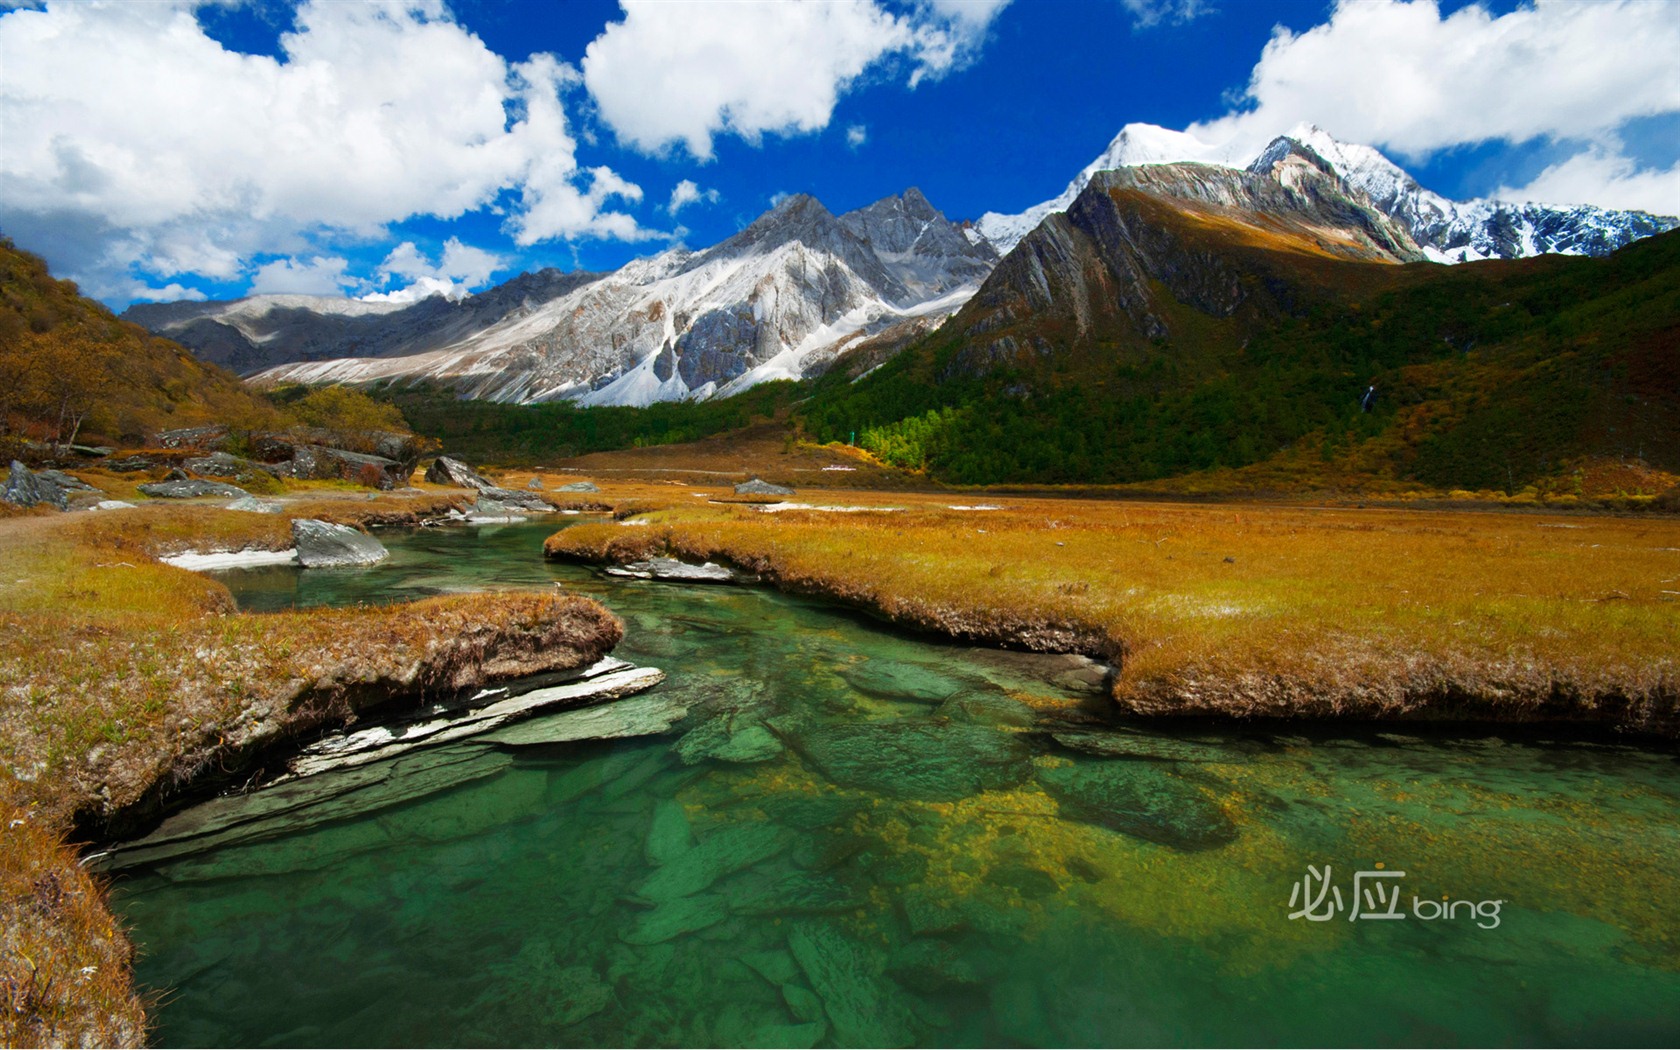 Best of Bing Wallpapers: China #10 - 1680x1050